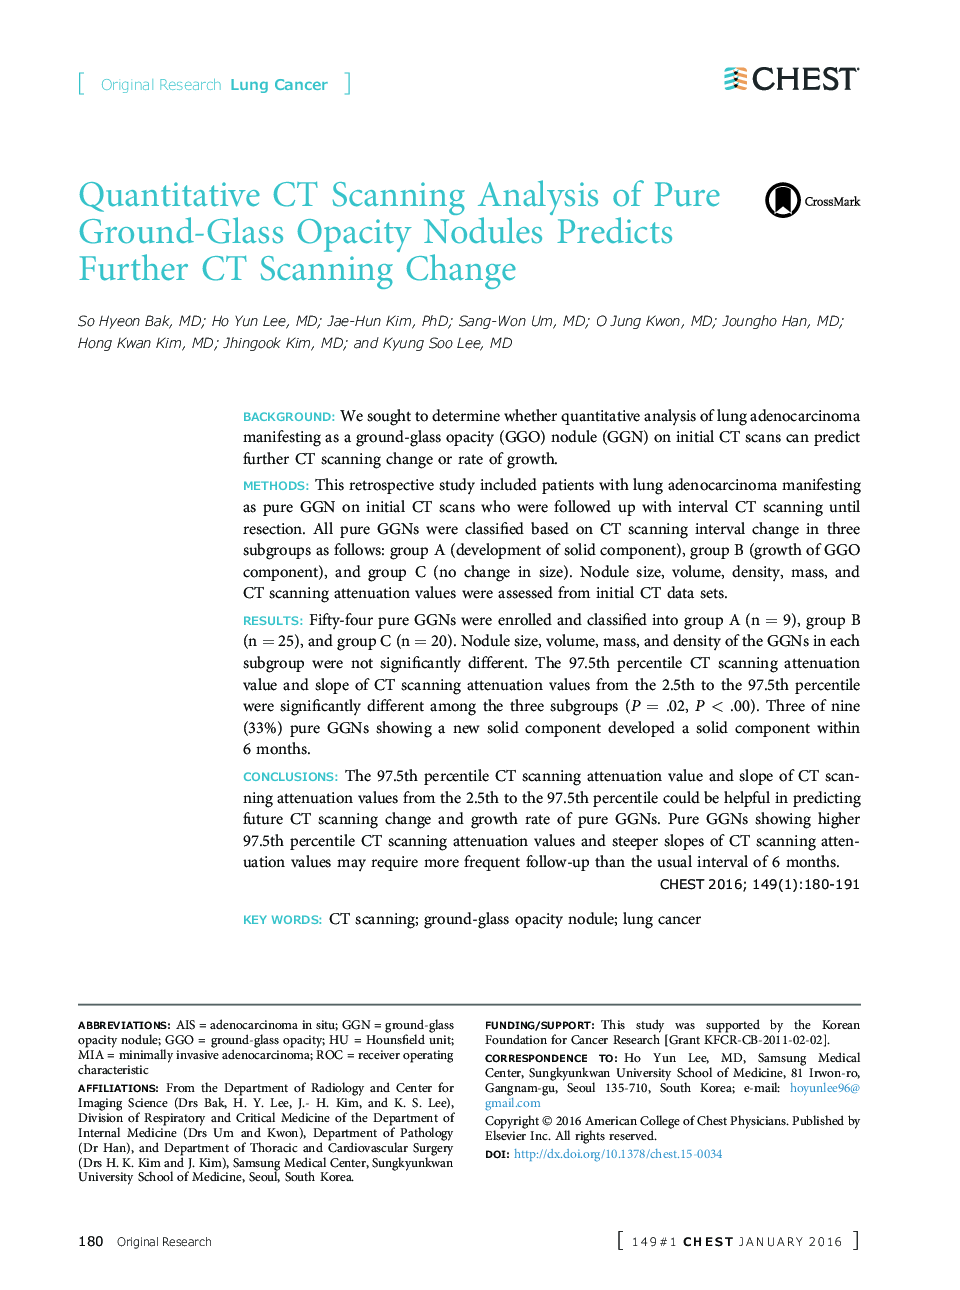 Original Research: Lung CancerQuantitative CT Scanning Analysis of Pure Ground-Glass Opacity Nodules Predicts Further CT Scanning Change